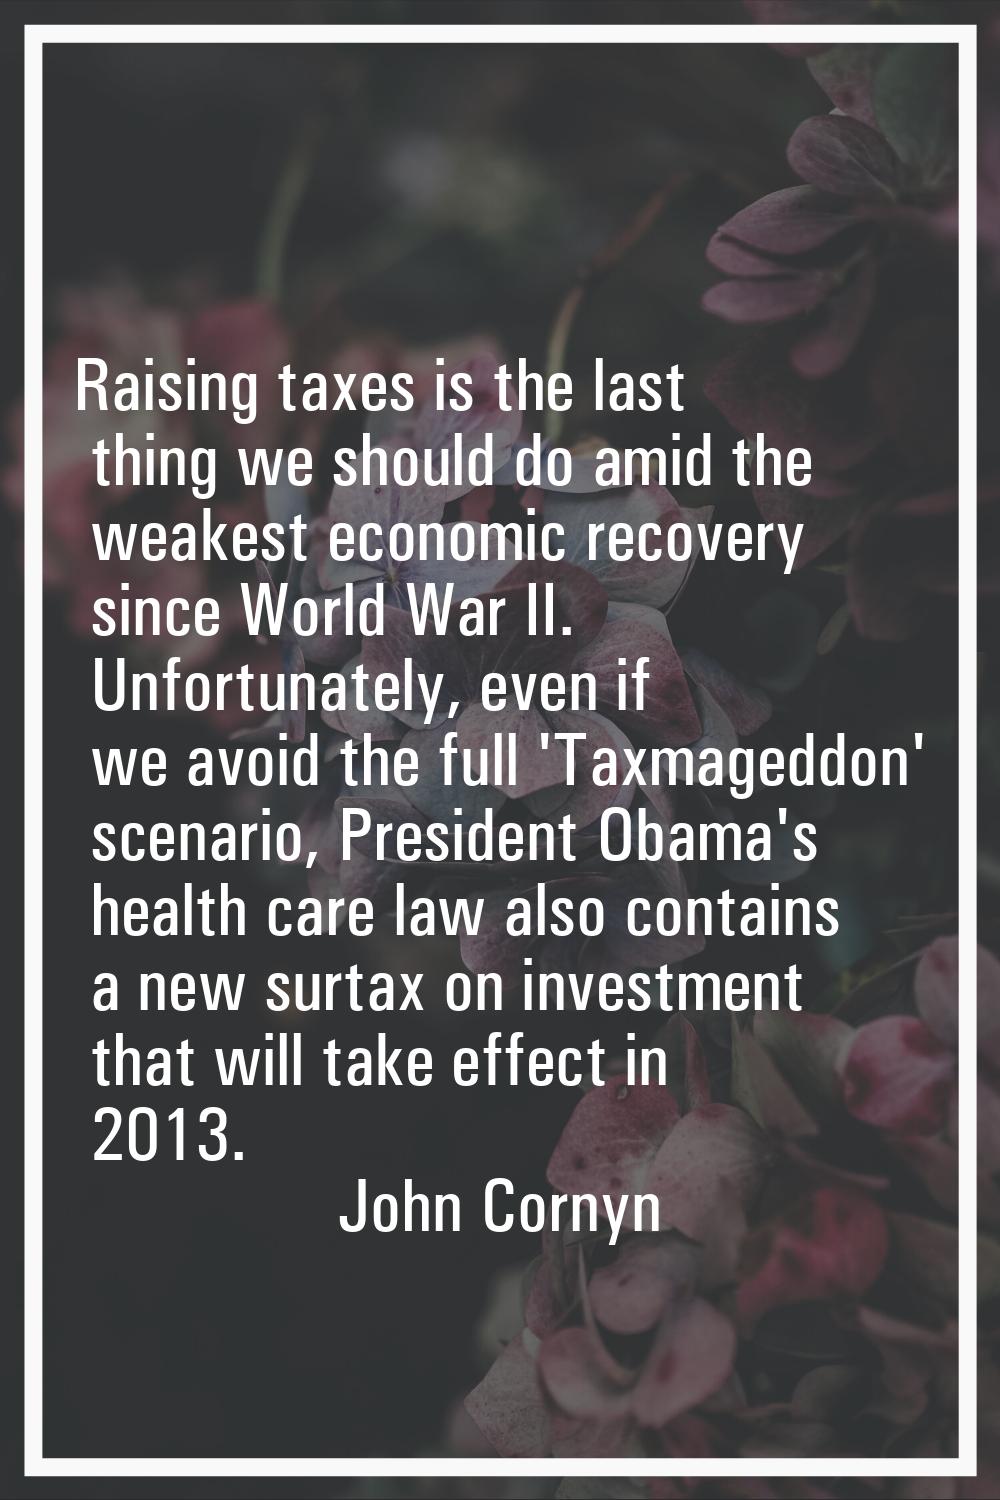 Raising taxes is the last thing we should do amid the weakest economic recovery since World War II.